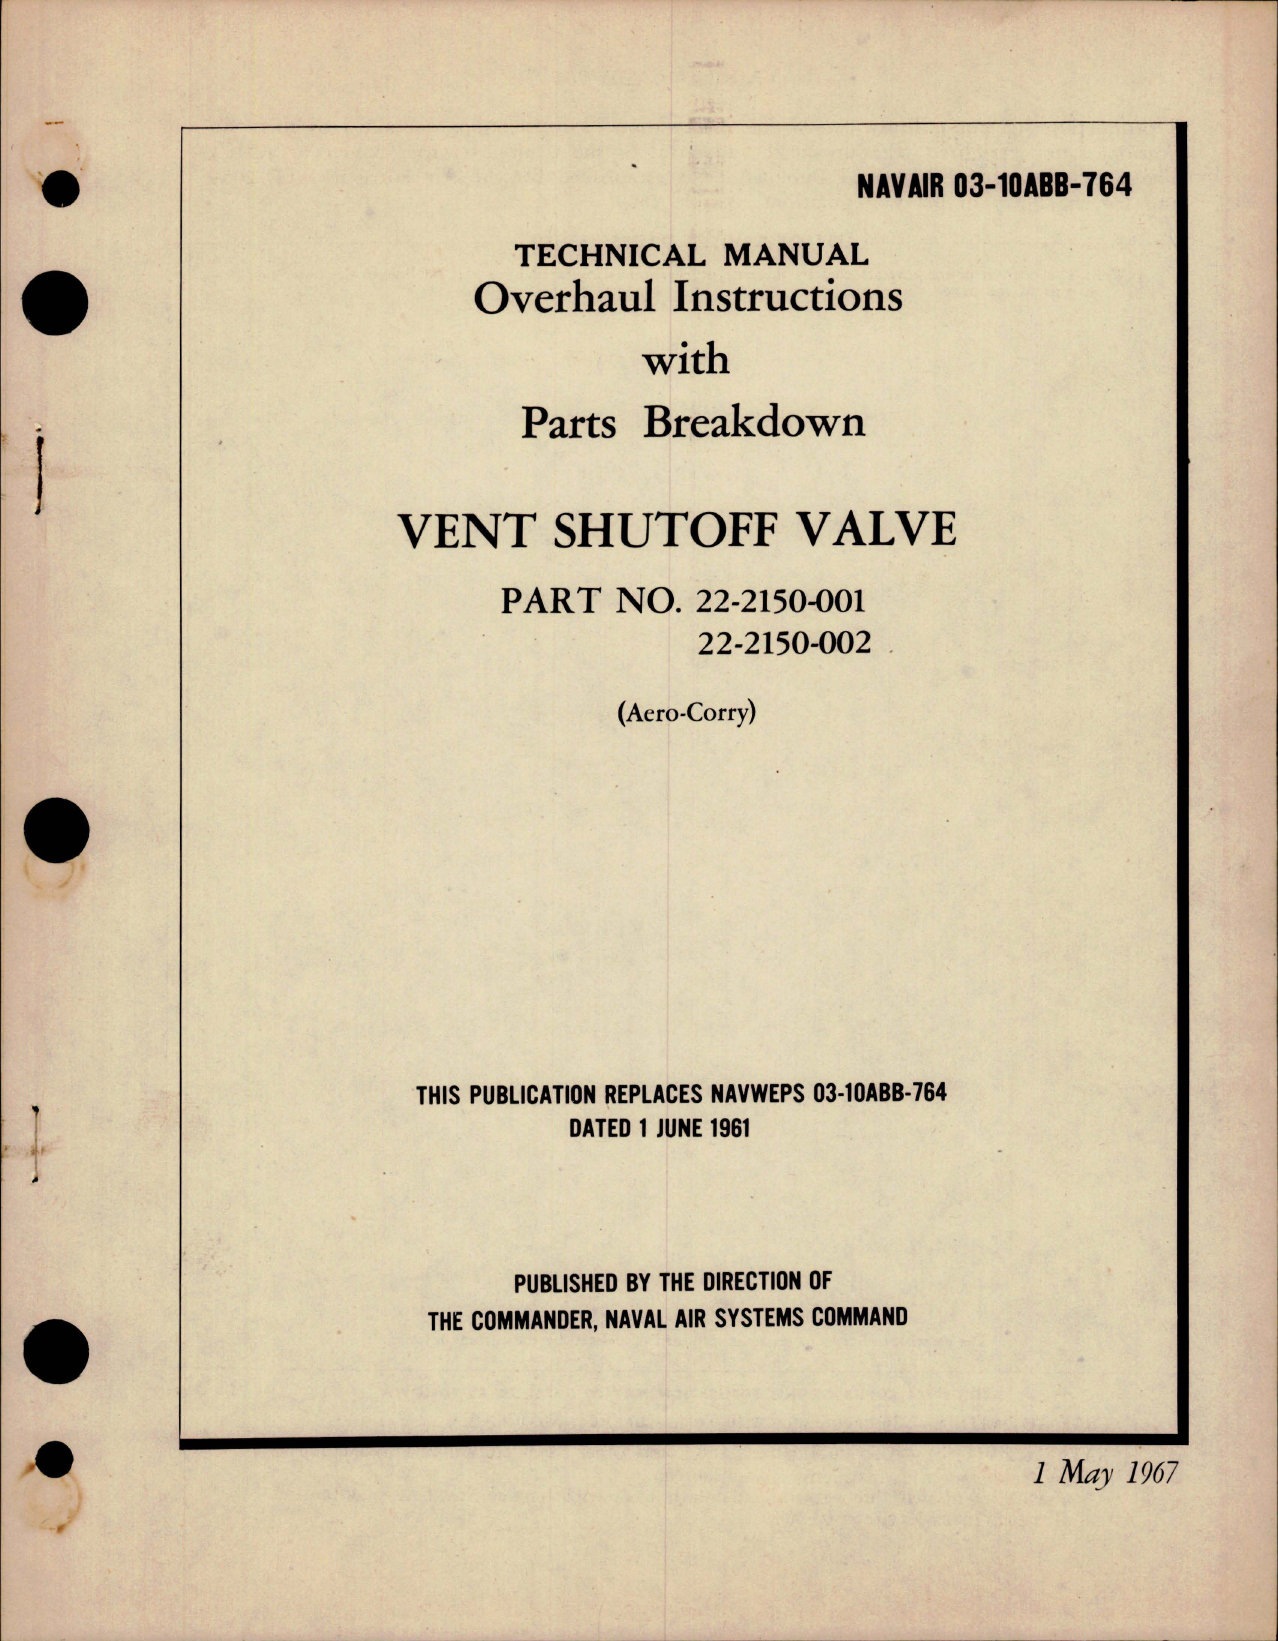 Sample page 1 from AirCorps Library document: Overhaul Instructions with Parts Breakdown for Vent Shutoff Valve - Part 22-2150-001 and 22-2150-002 